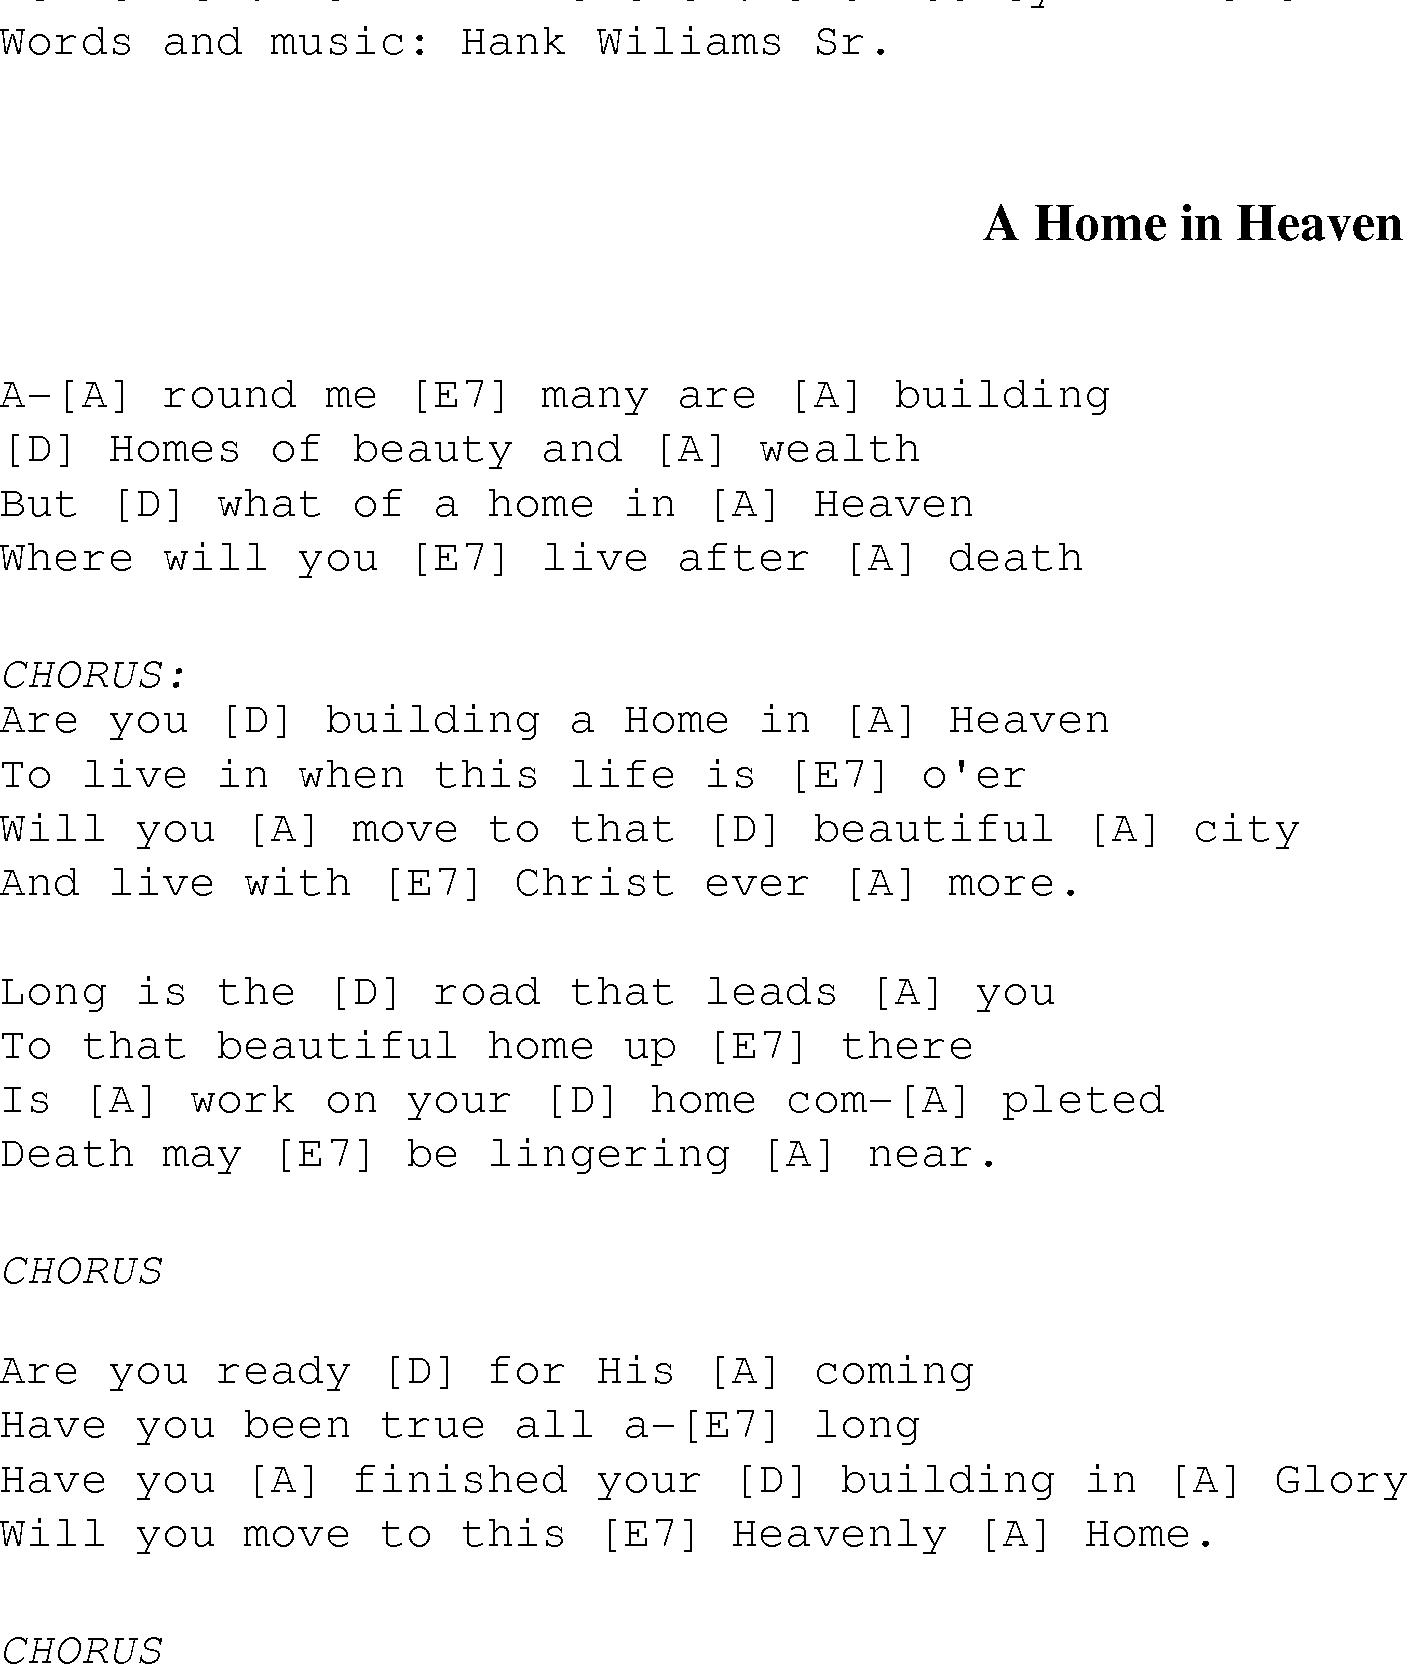 Gospel Song: a_home_in_heaven, lyrics and chords.